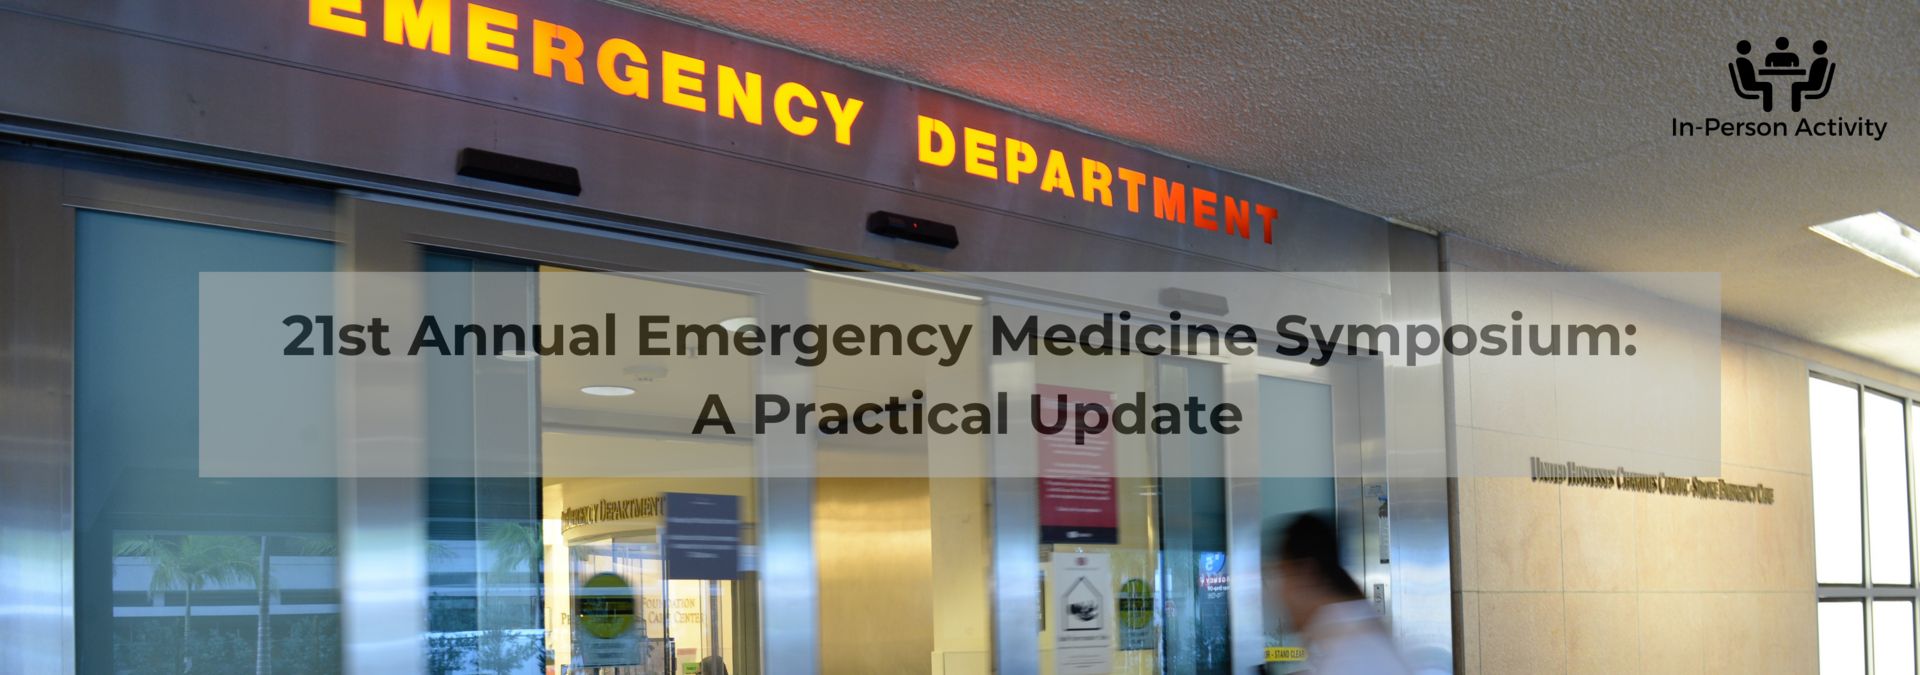 21st Annual Emergency Medicine Symposium: A Practical Update, Los Angeles, California, United States